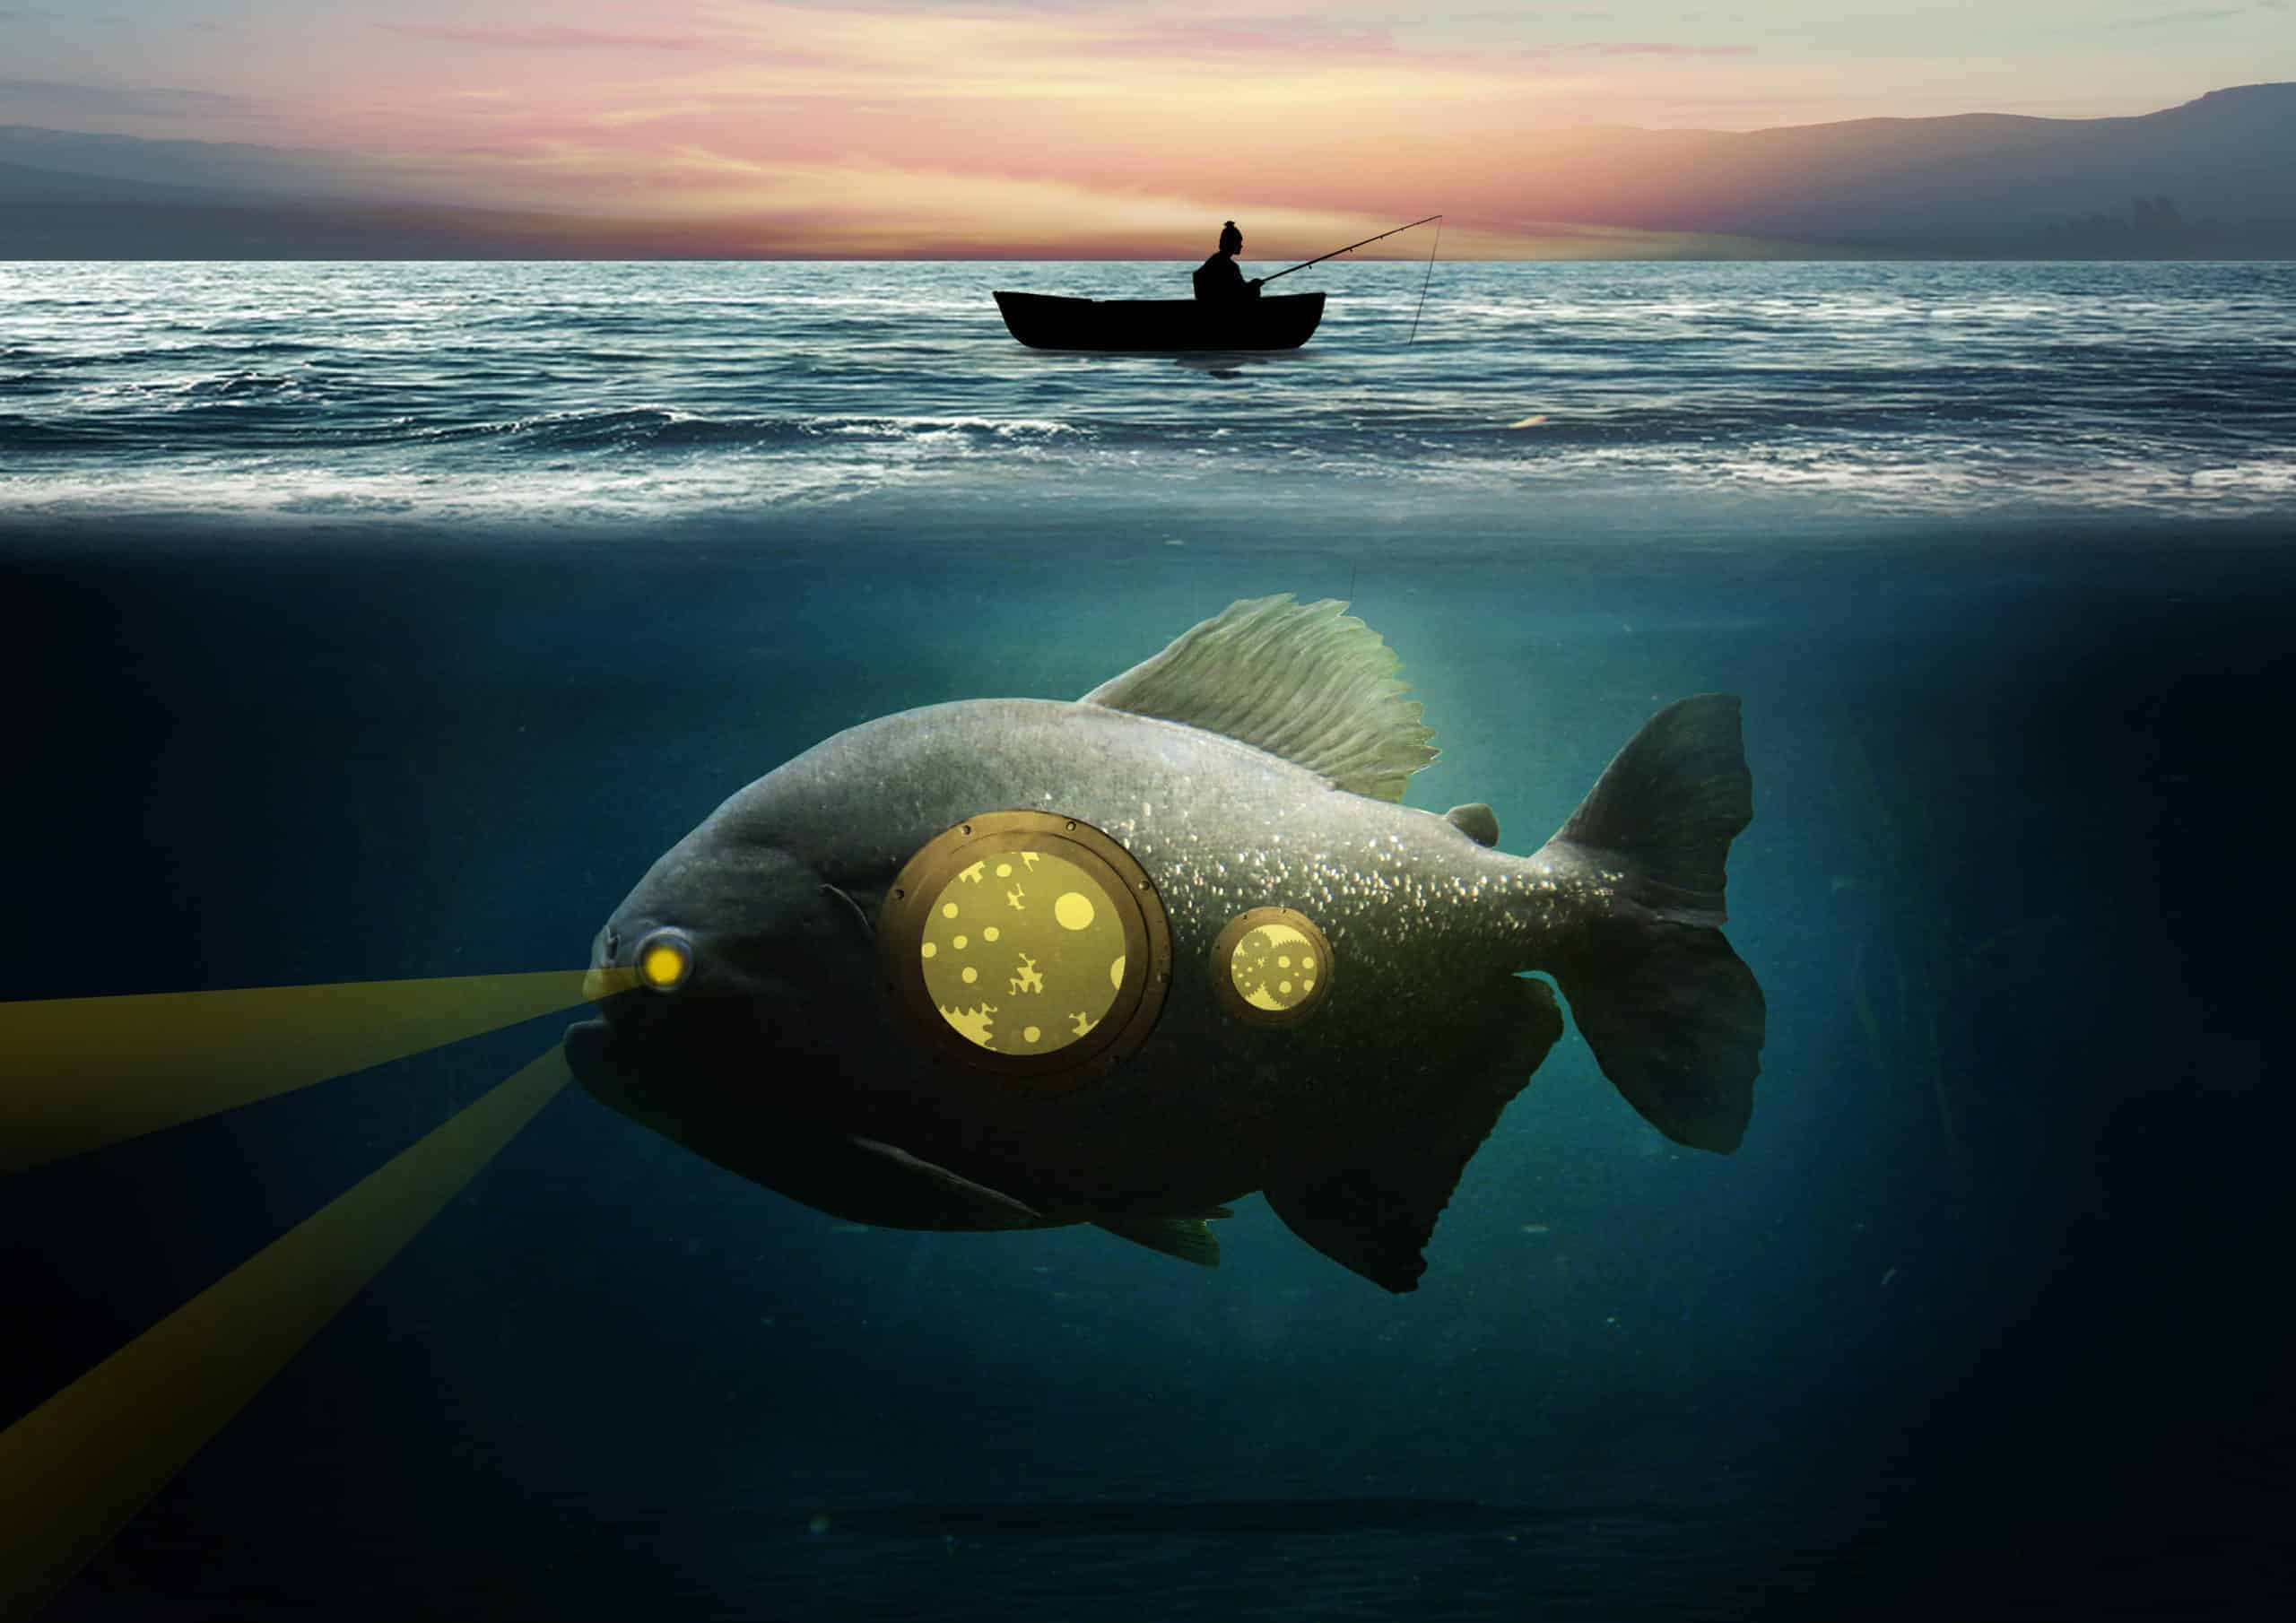 How to Create a Beautiful Underwater Surreal Scene in Photoshop